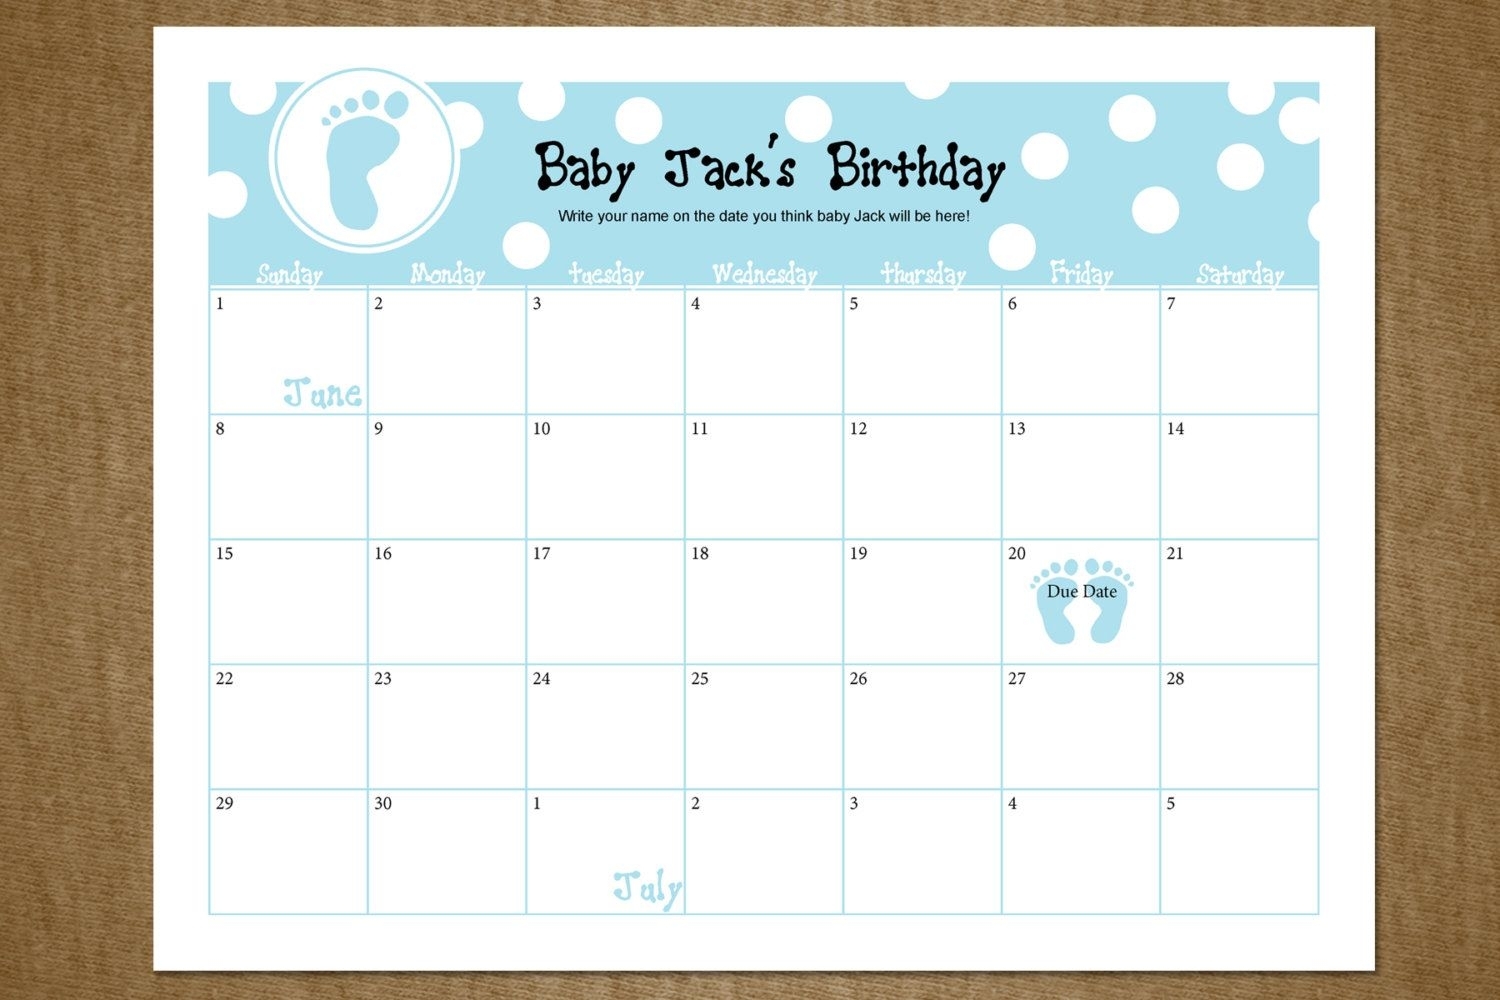 babies due date guess large print out 56